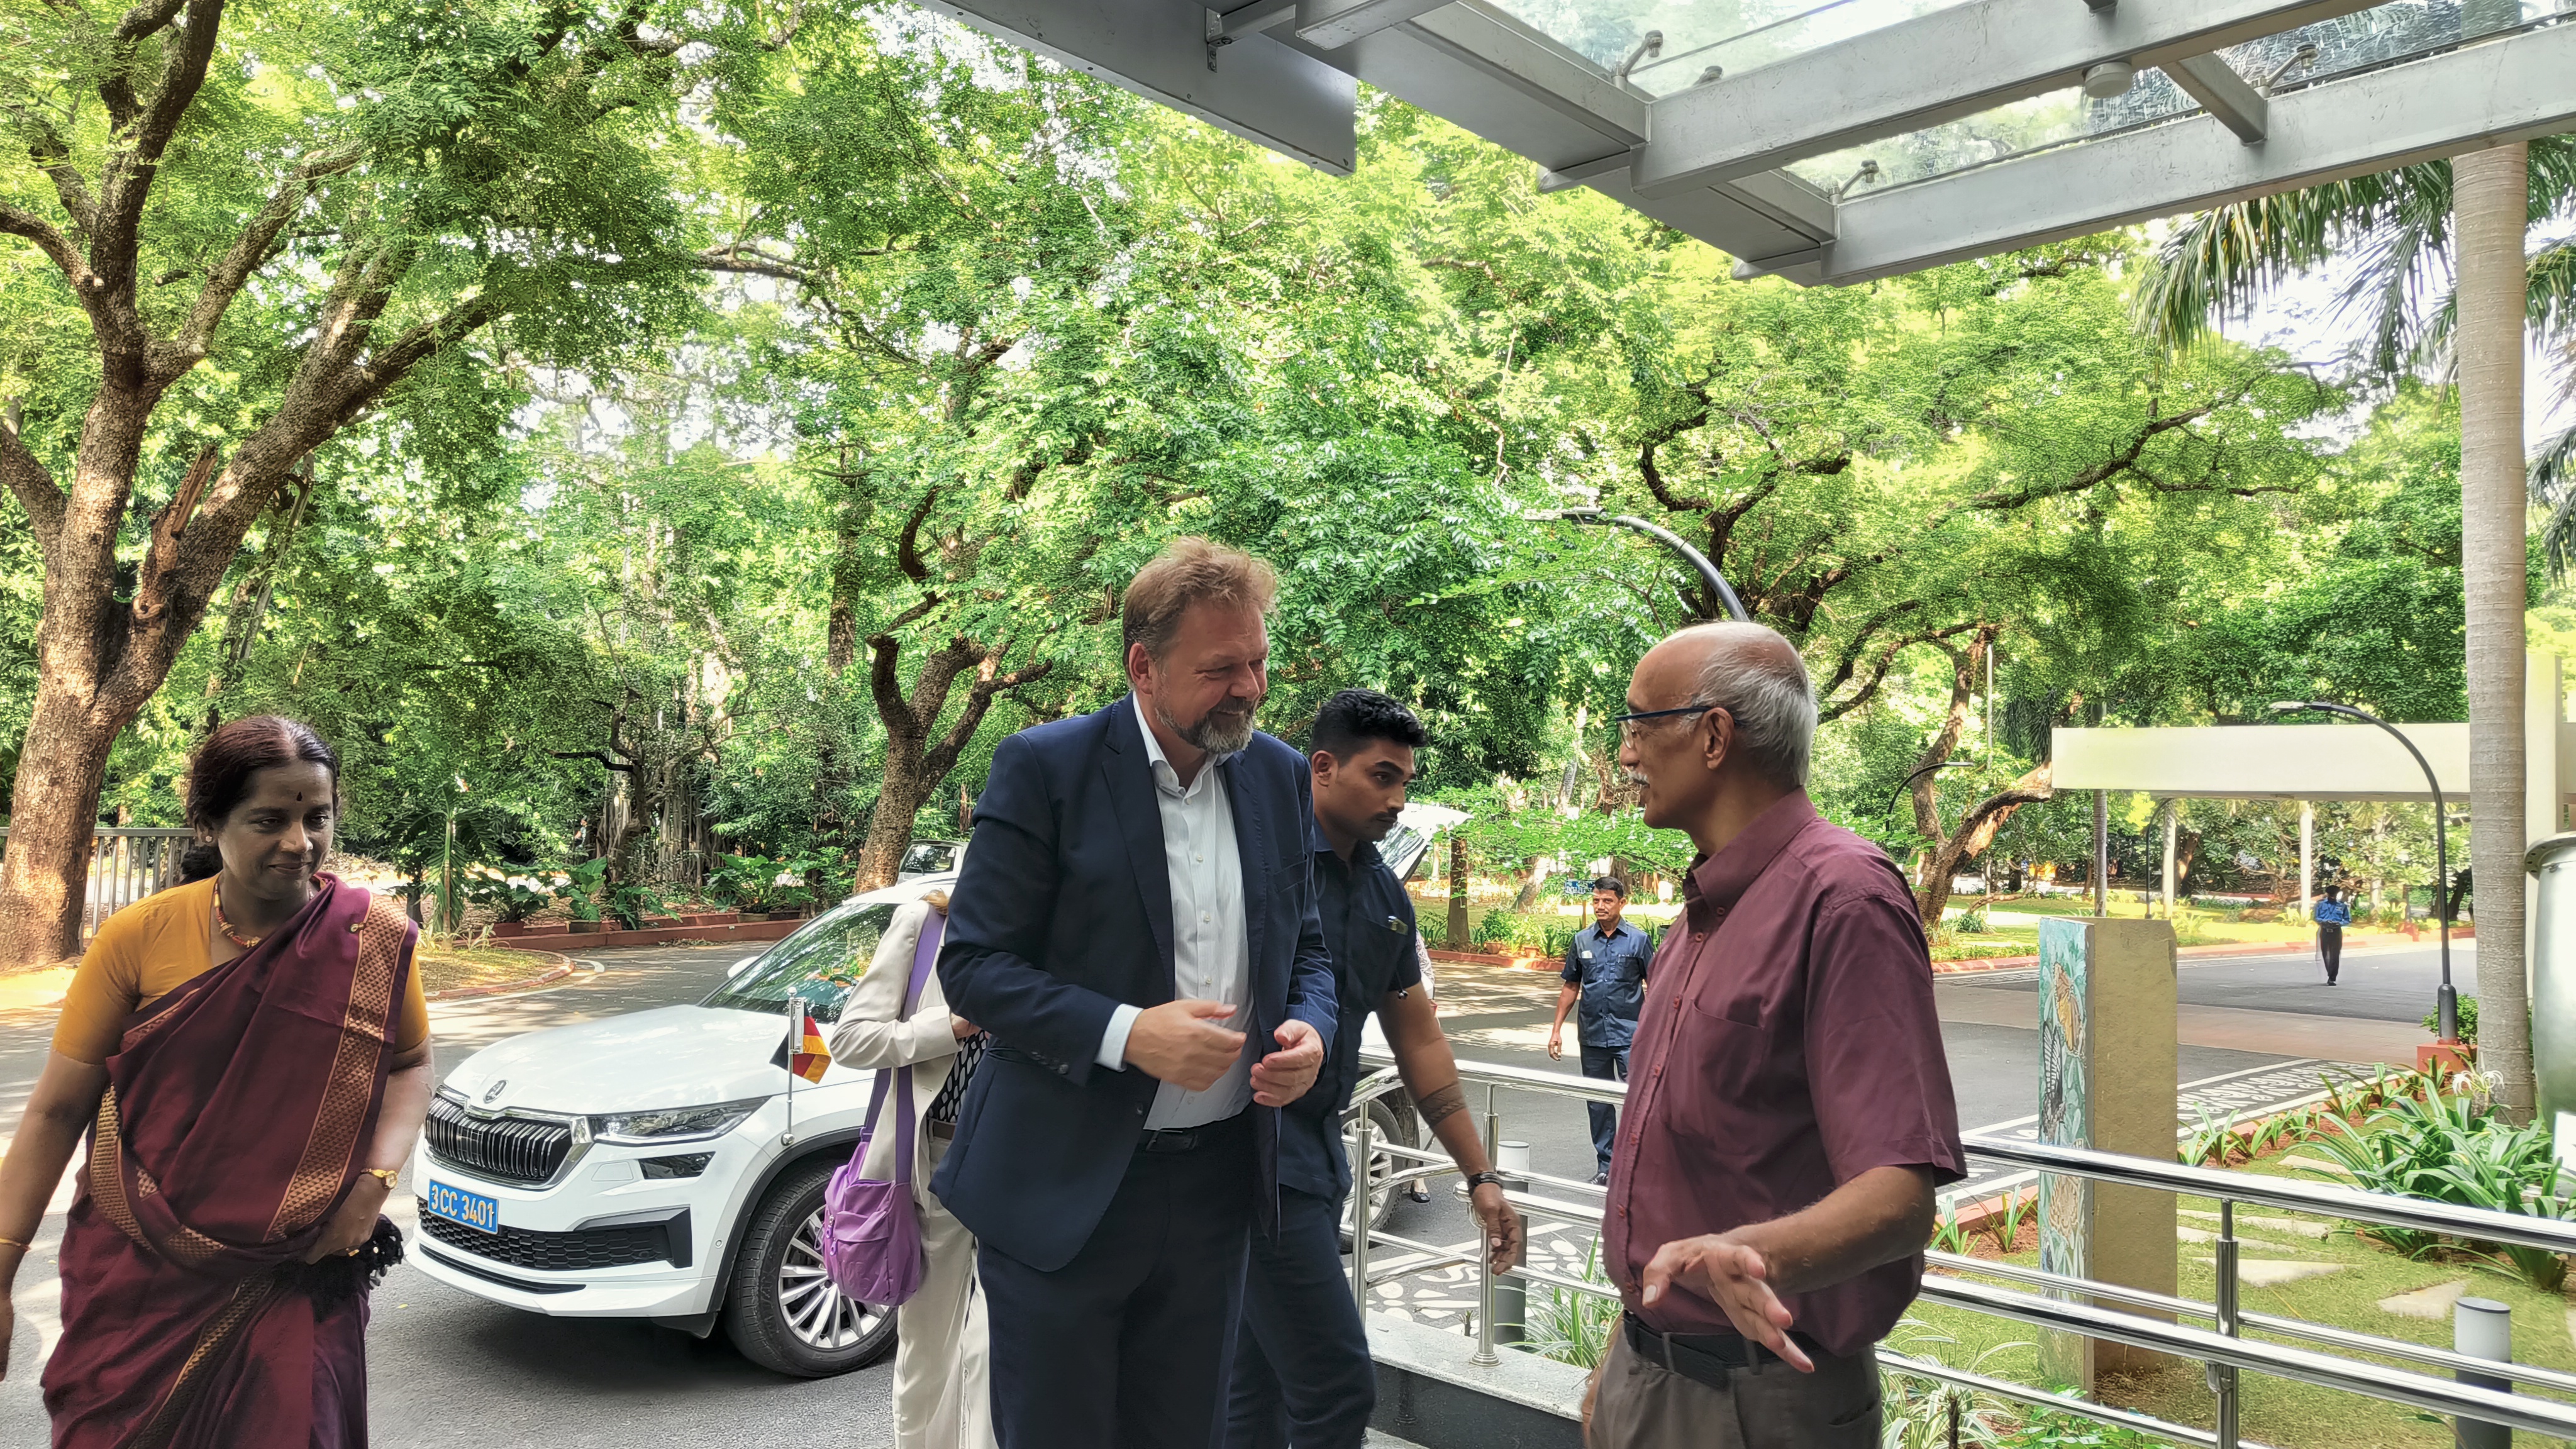 Dr. Ackermann is received at the Heritage Centre by Prof. Nagarajan (Faculty-in-charge of Heritage Centre)